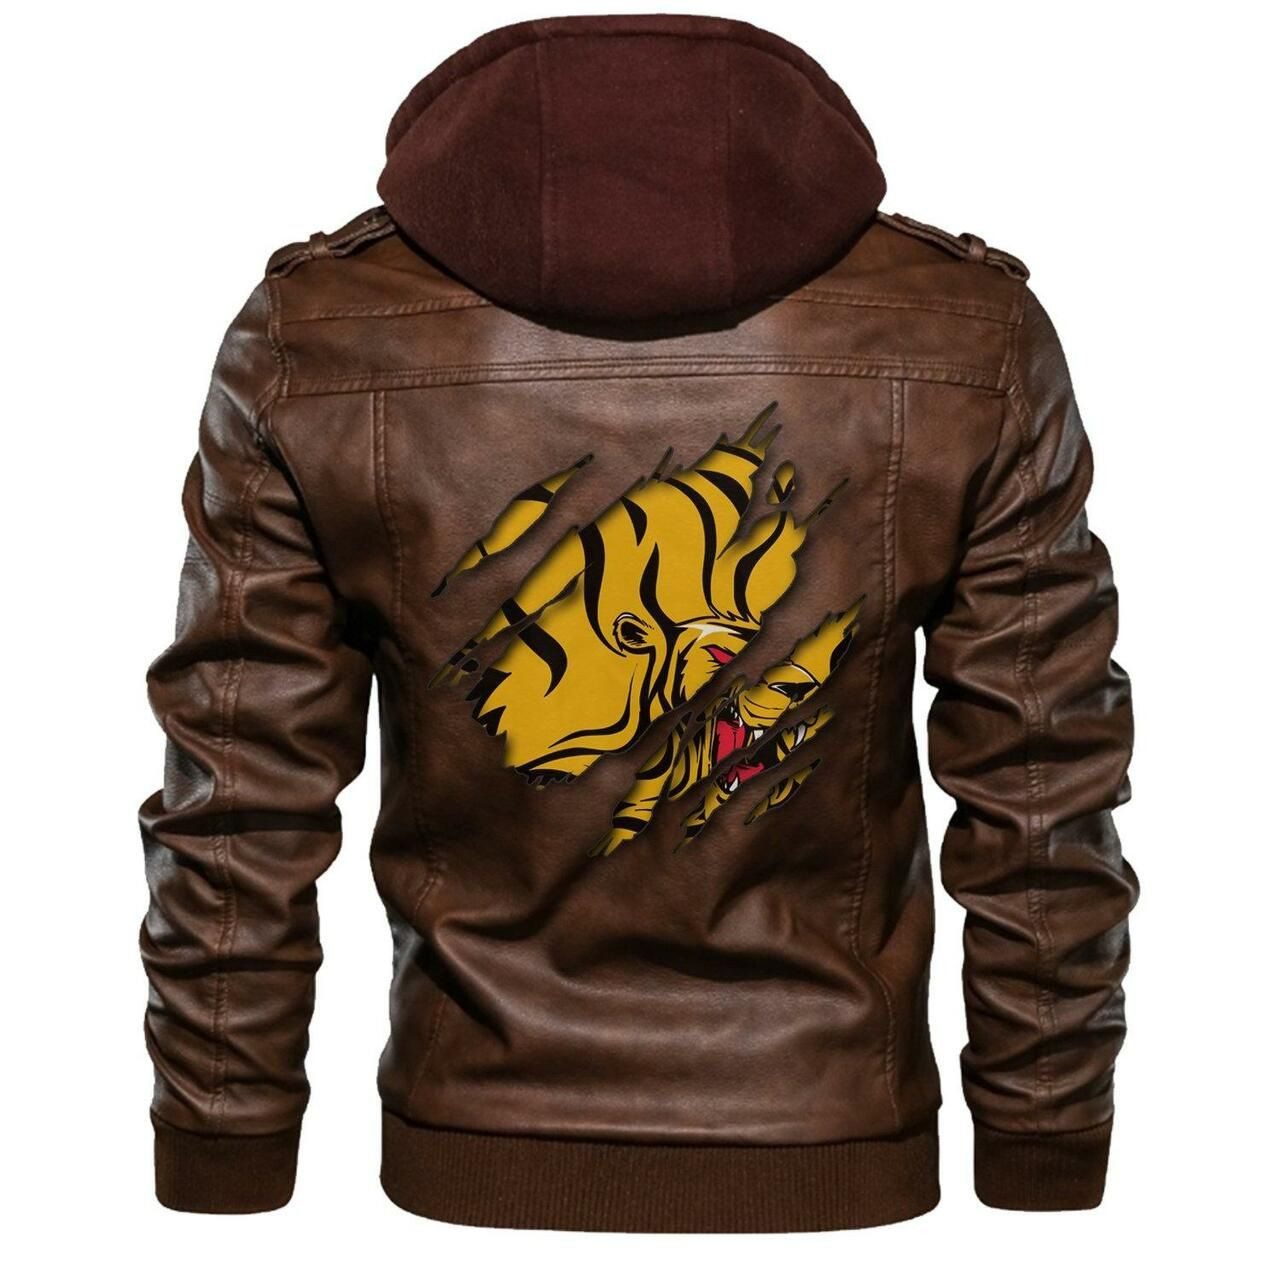 These Amazing Leather Jacket will add to the appeal of your outfit 126